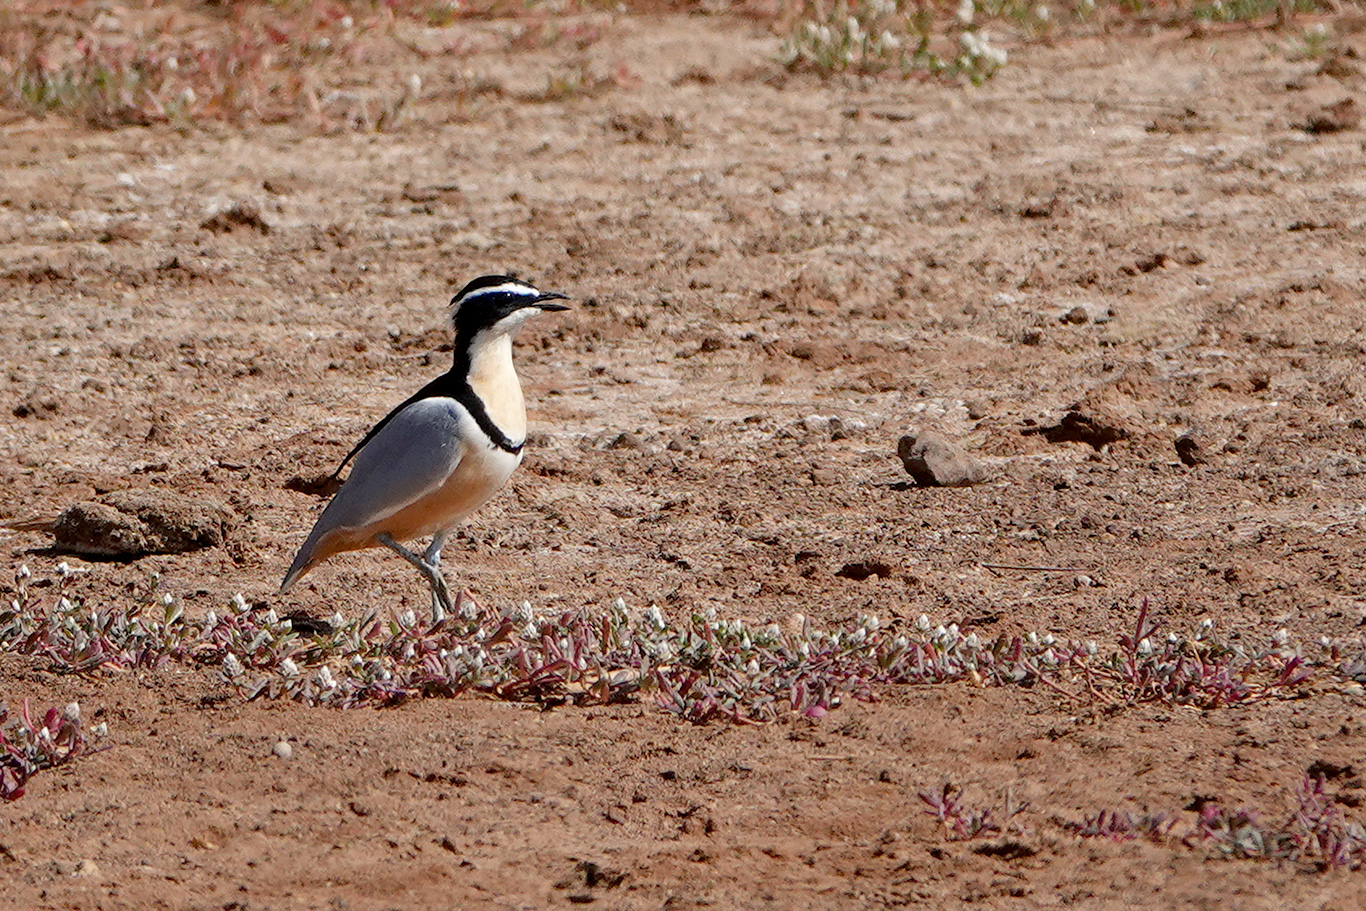 Egyptian Plover, Wassu, The Gambia.